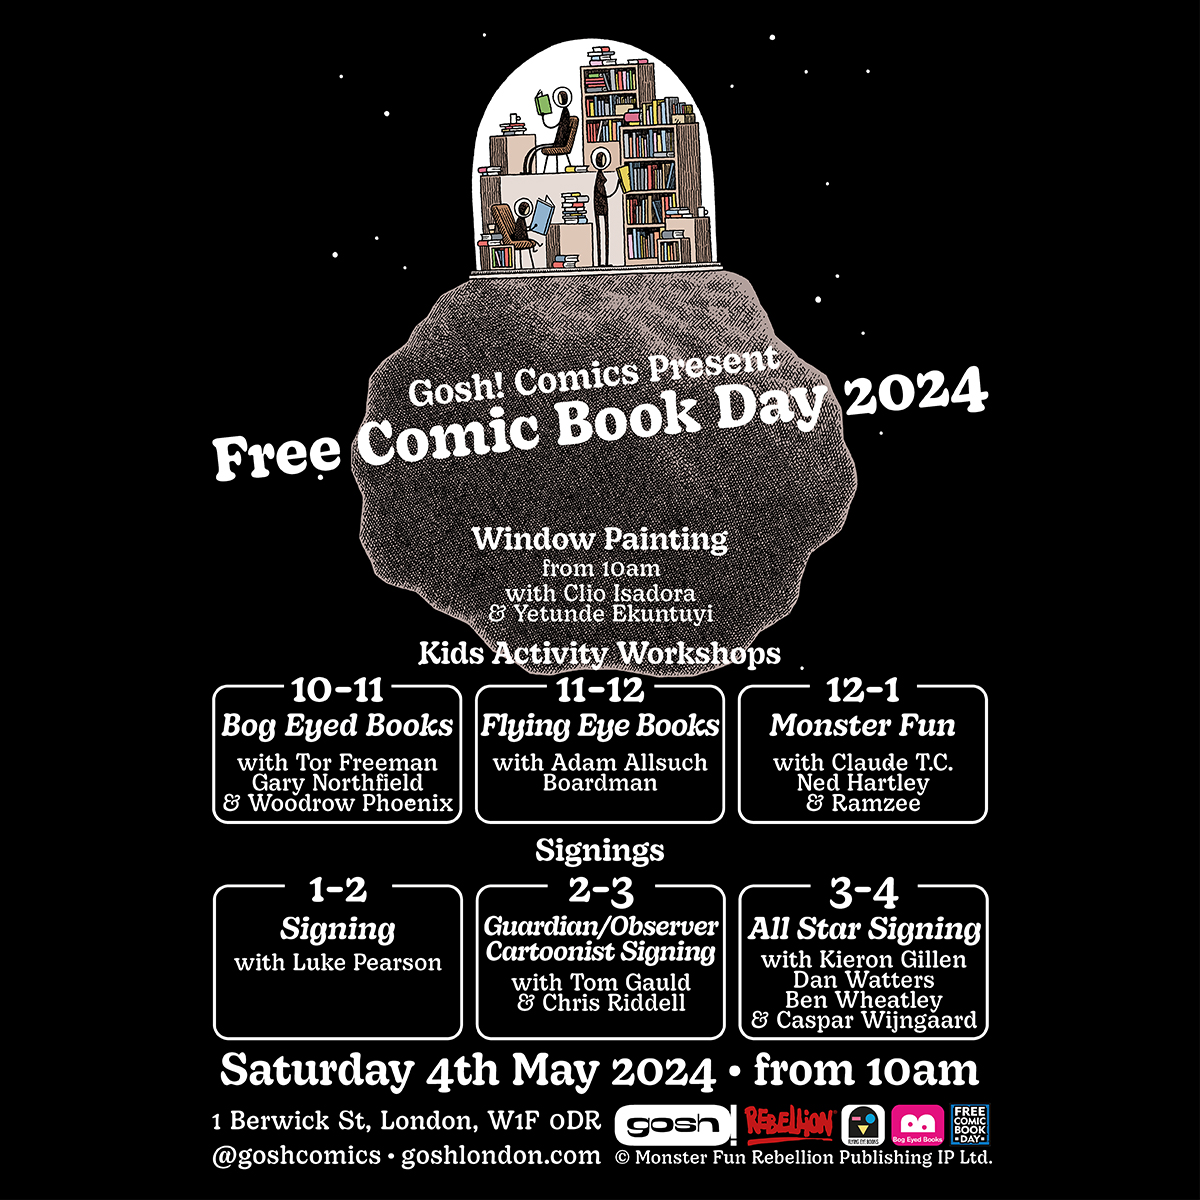 Next Saturday is Free Comic Book Day! @goshcomics has lots going on: 🟢 Get FREE comic books with your purchase 🔵 All-day workshops and signings More info available on the GOSH! Website: goshlondon.com/the-gosh-blog/…